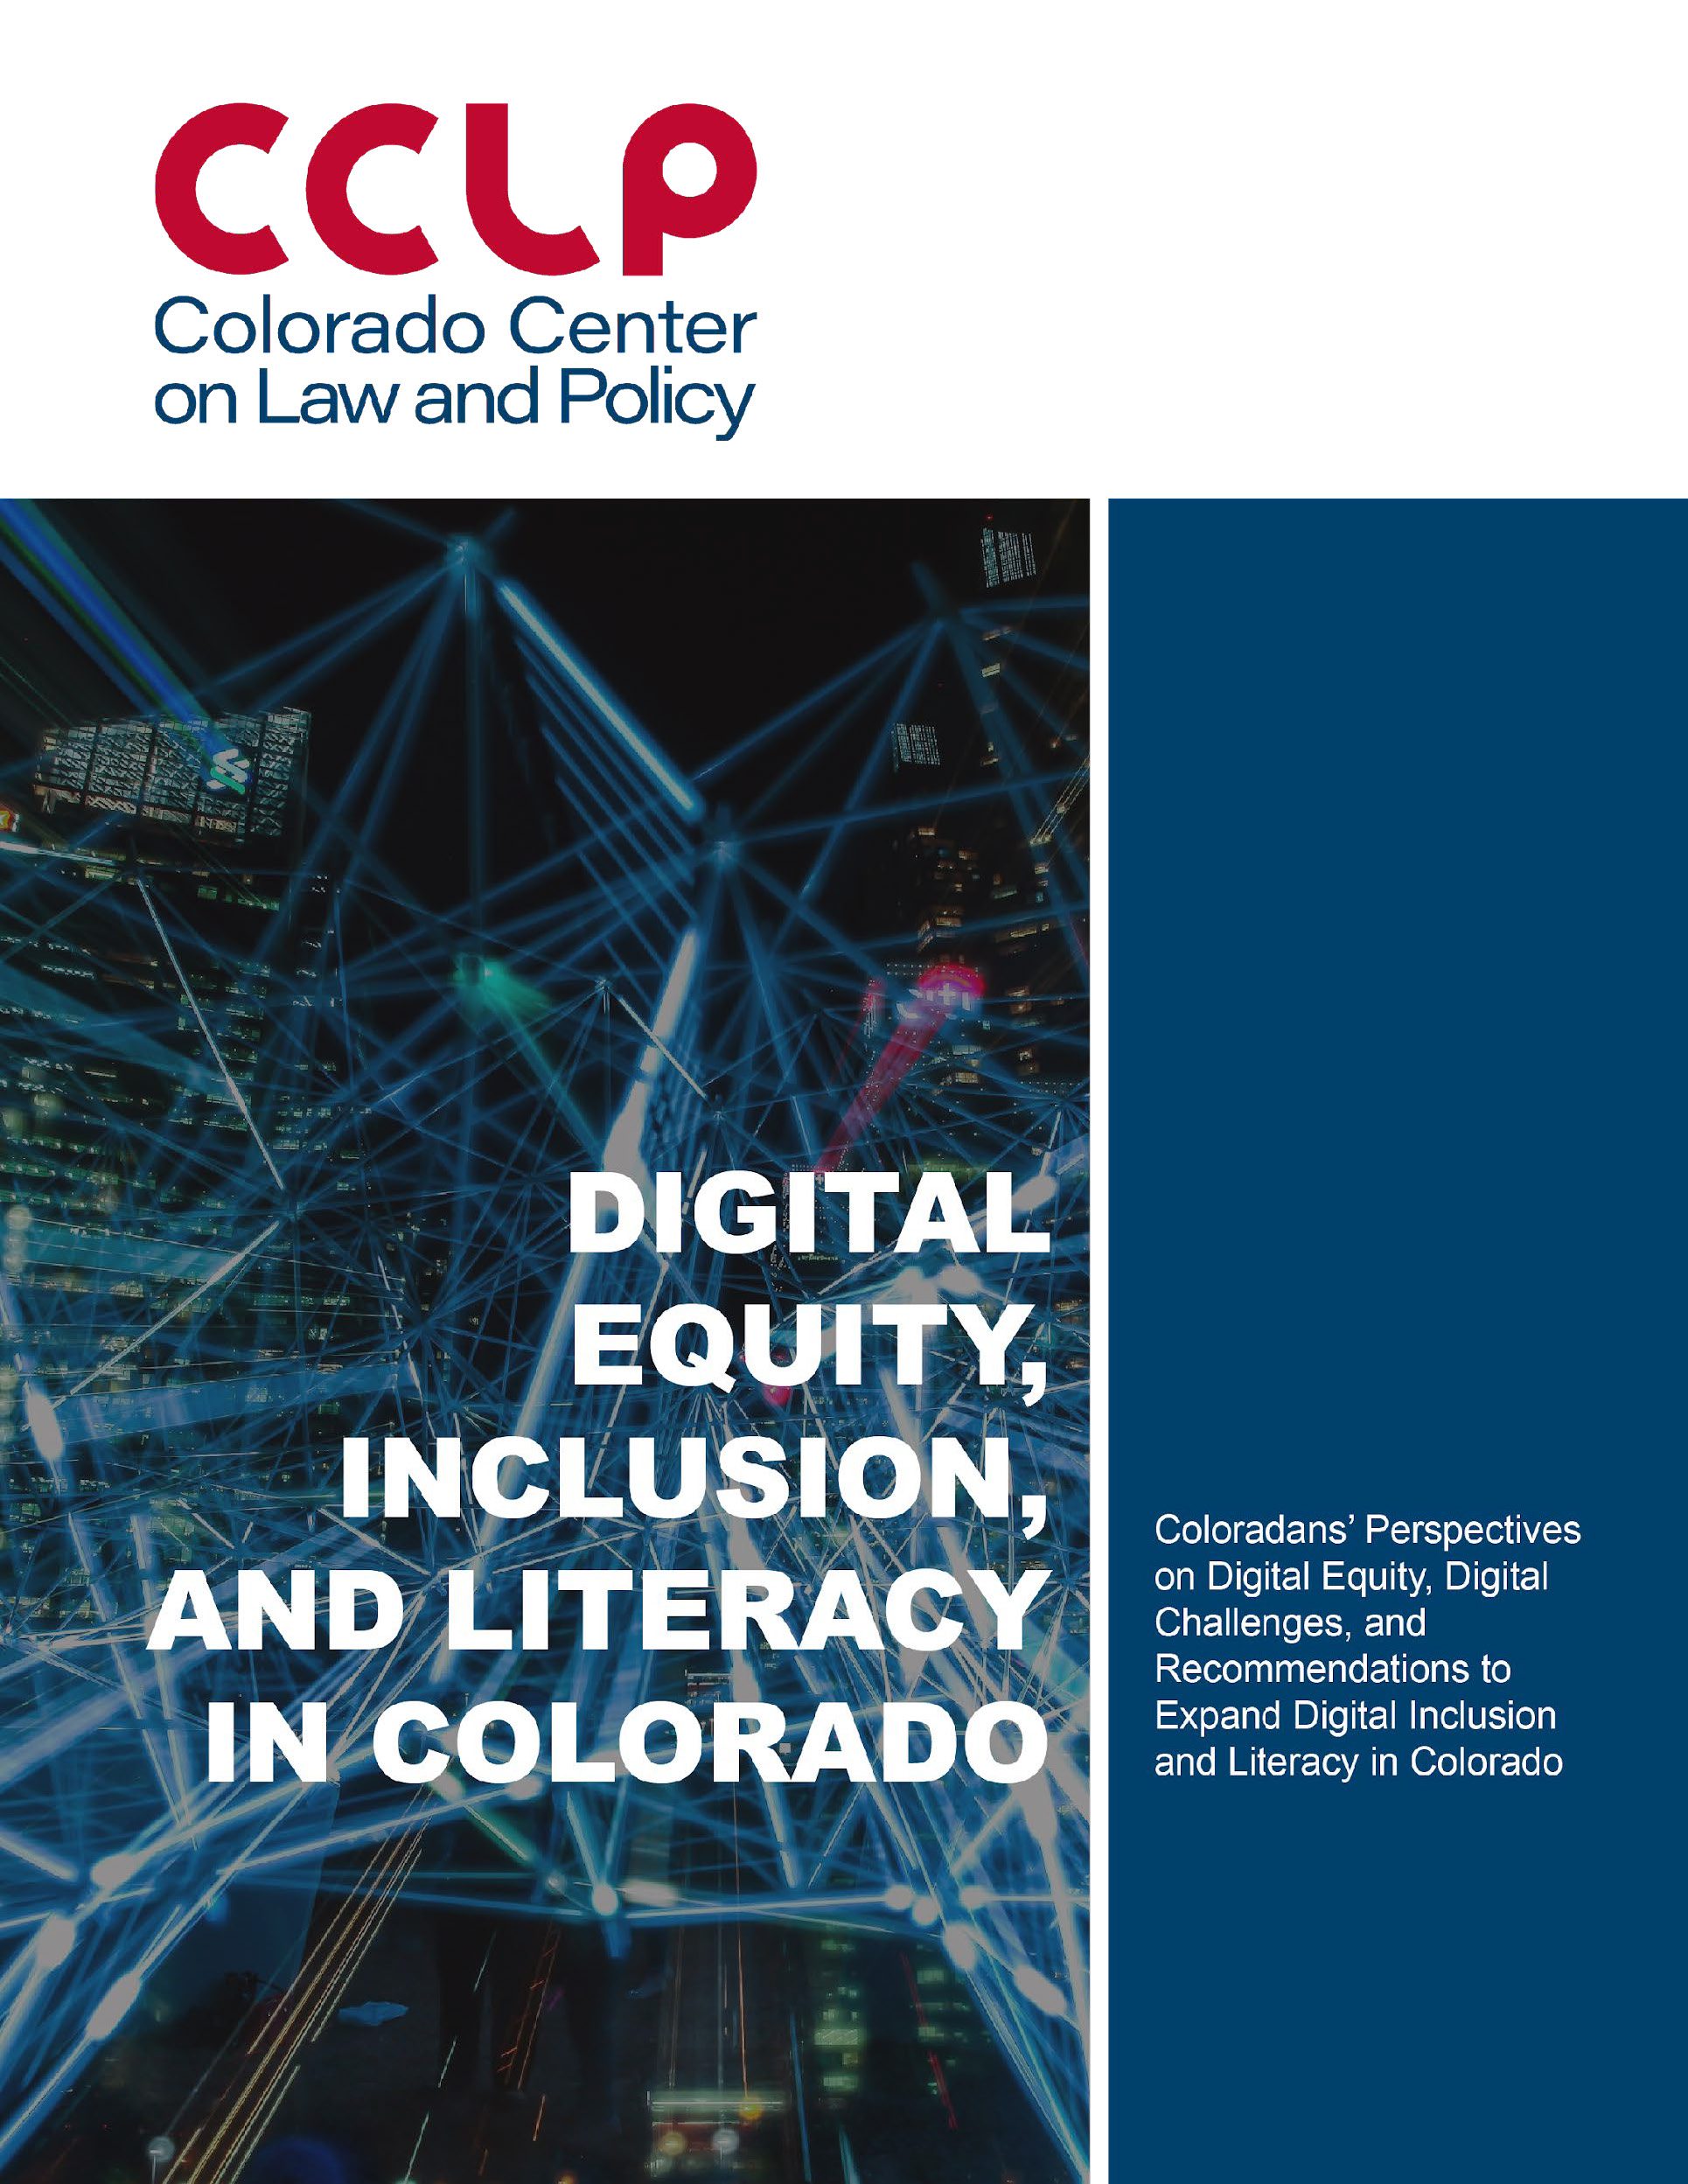 Cover image for Digital Equity, Inclusion, and Literacy in Colorado report